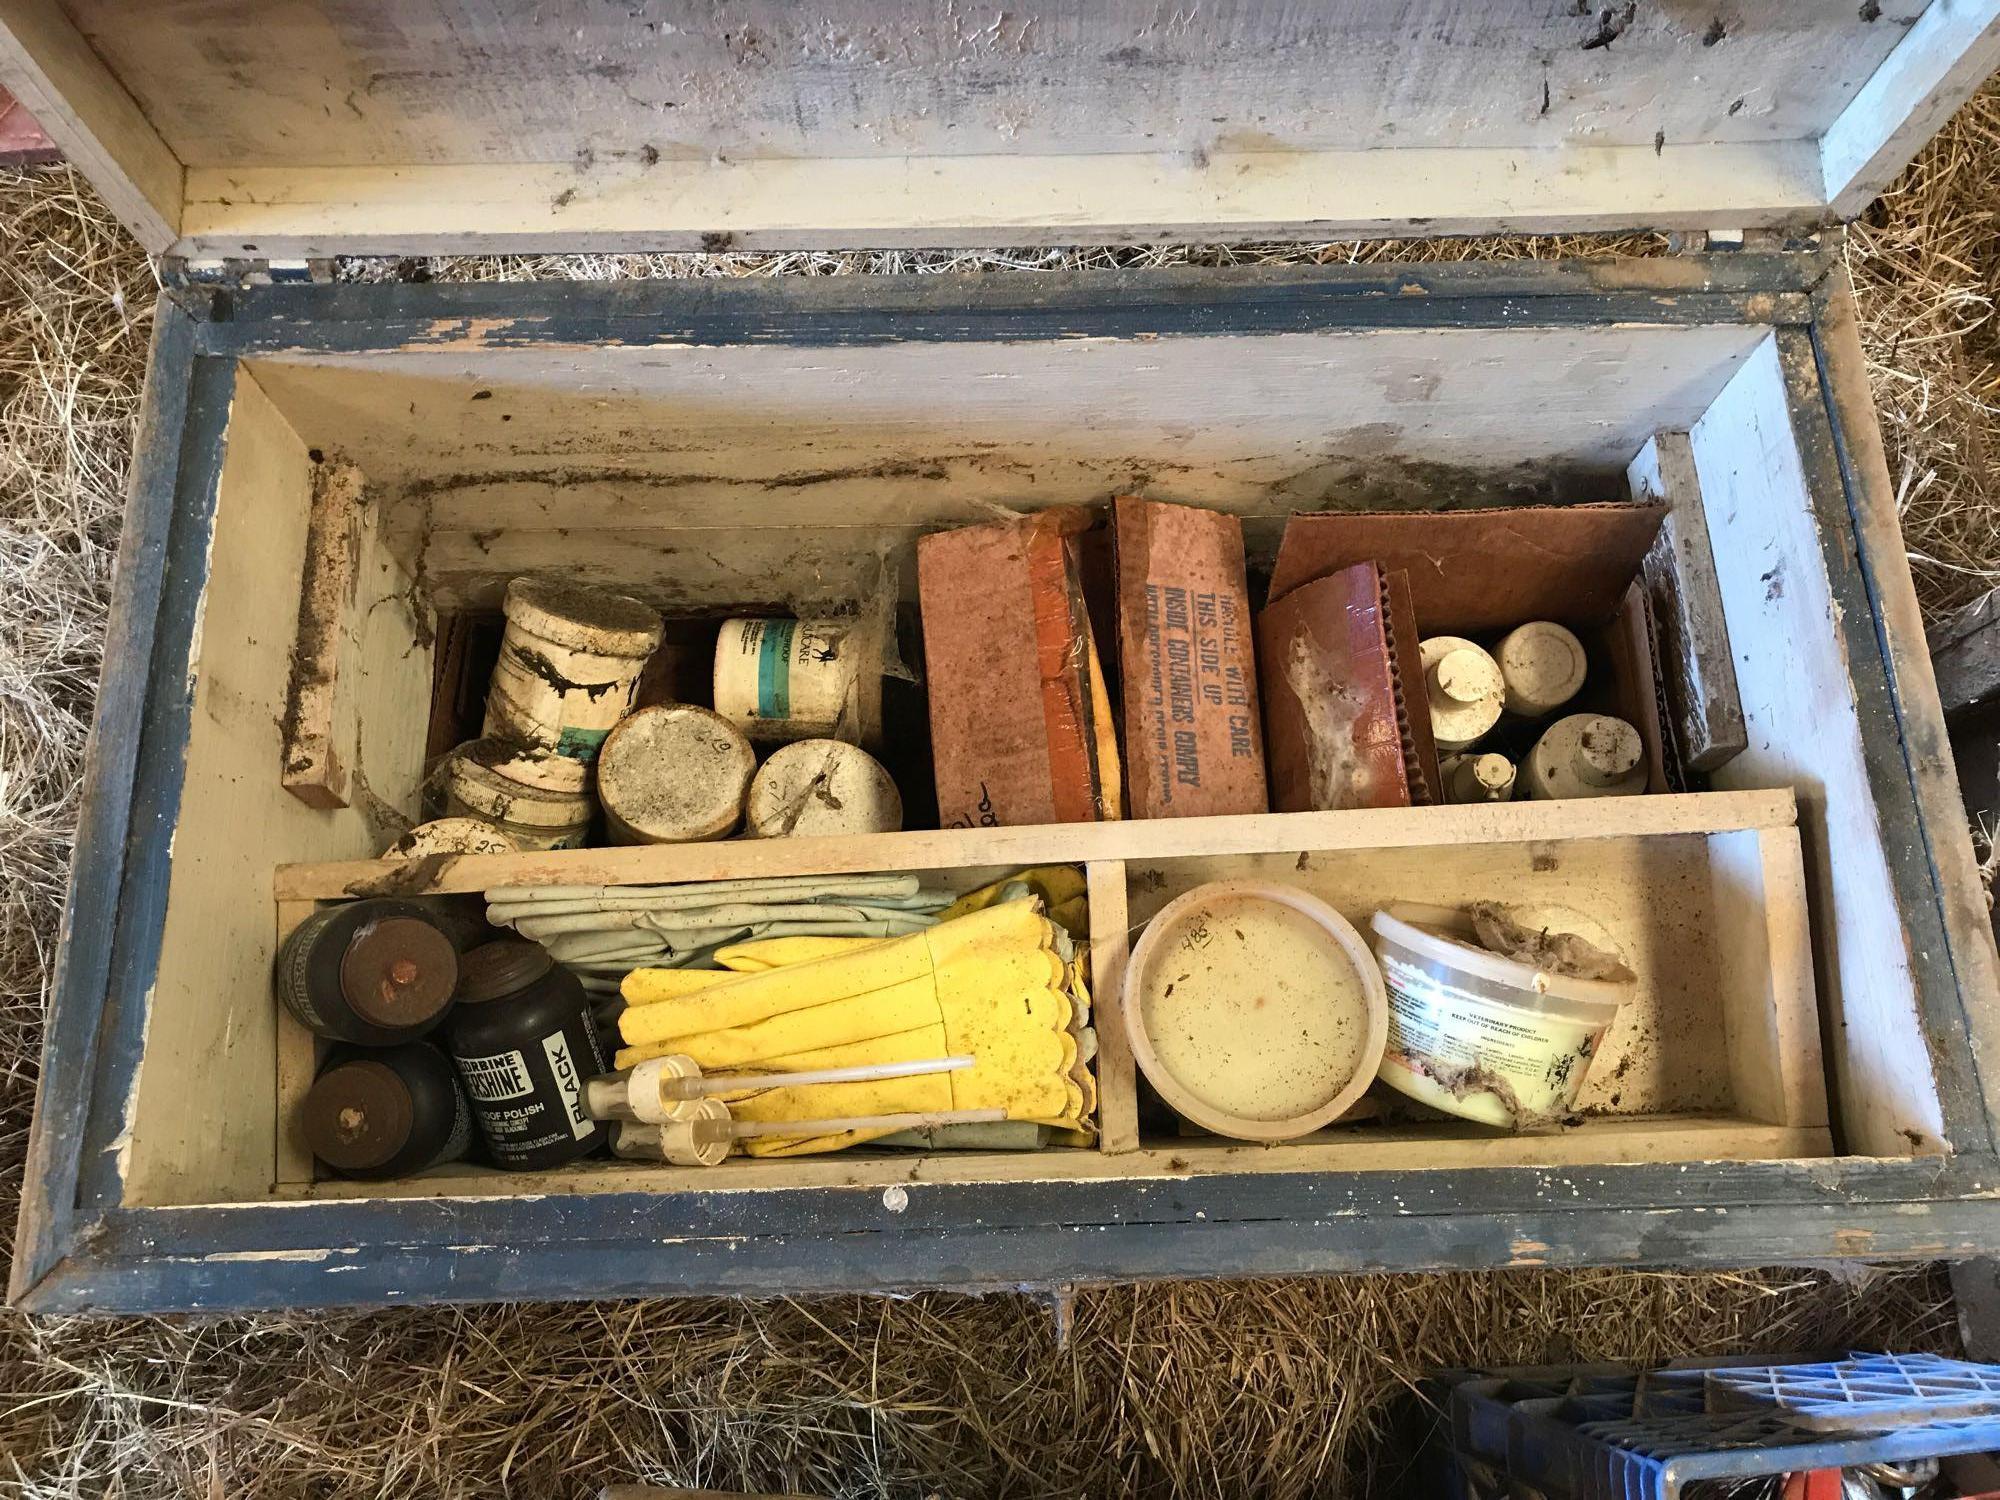 Two Tack Boxes - Misc. Tools - Stewart Mod 51 Clippers - Nails